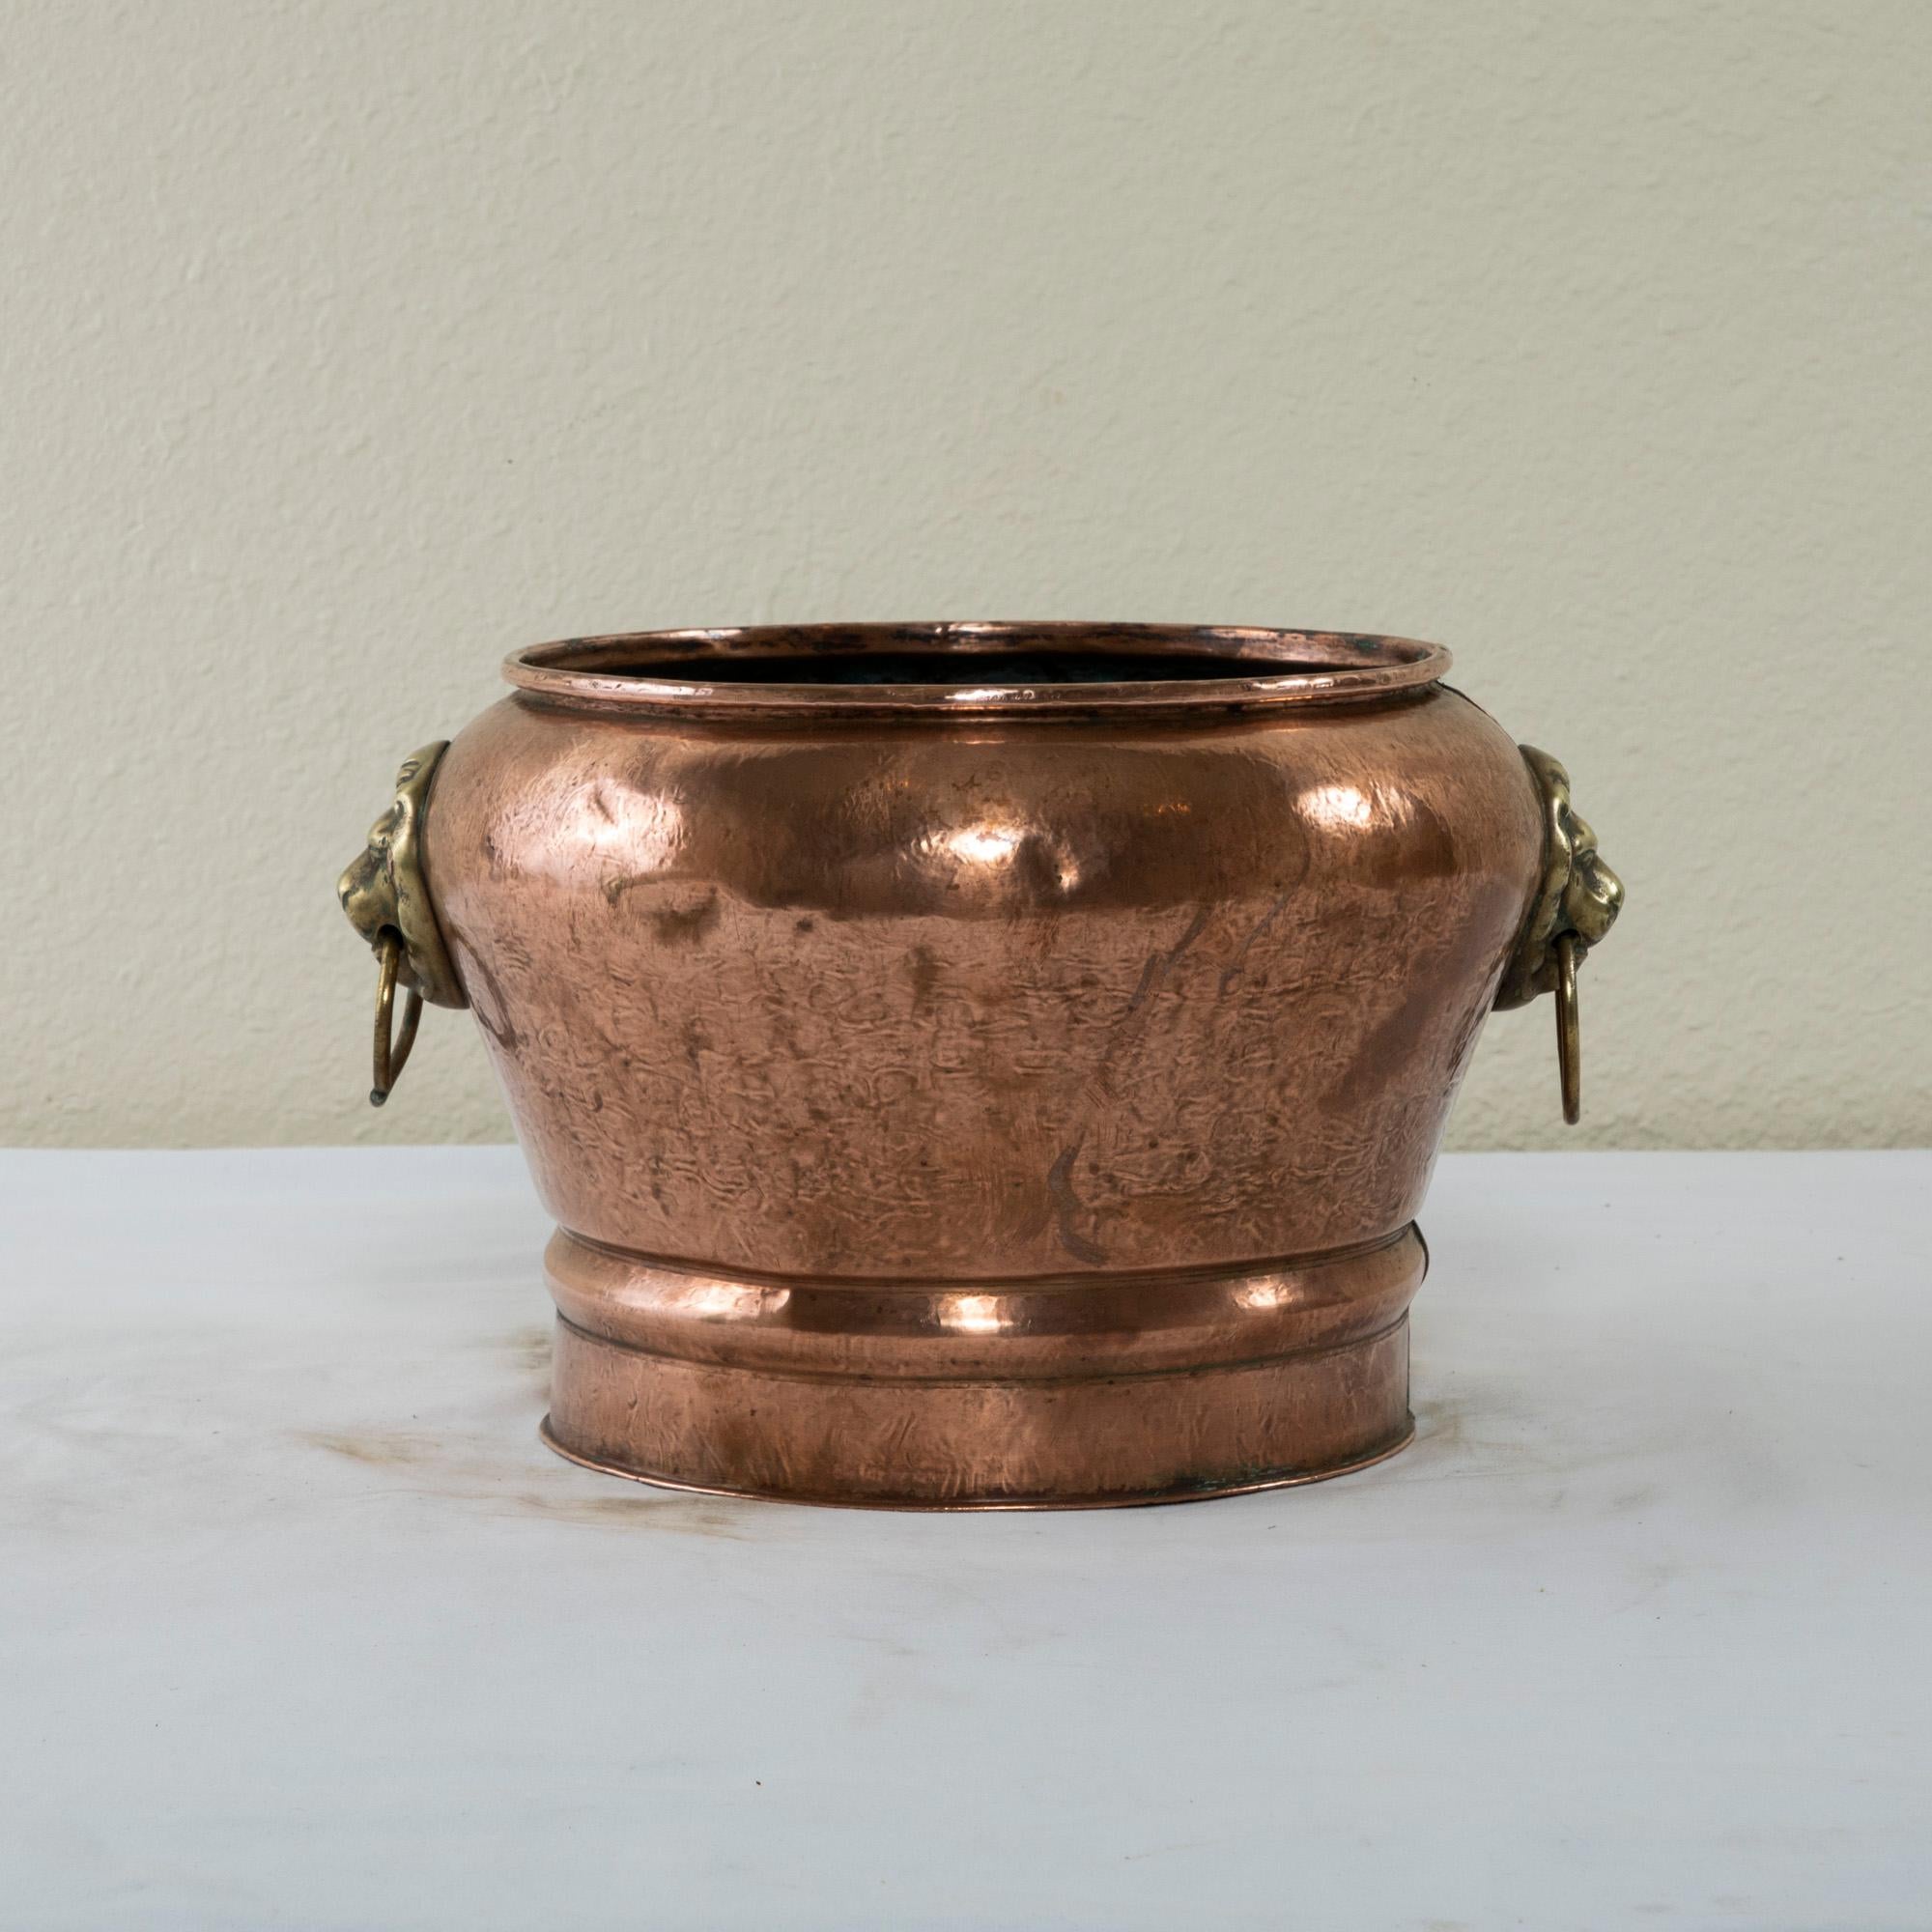 Early 20th Century French Hand Hammered Copper Cachepot or Planter with Lion Heads, c. 1900